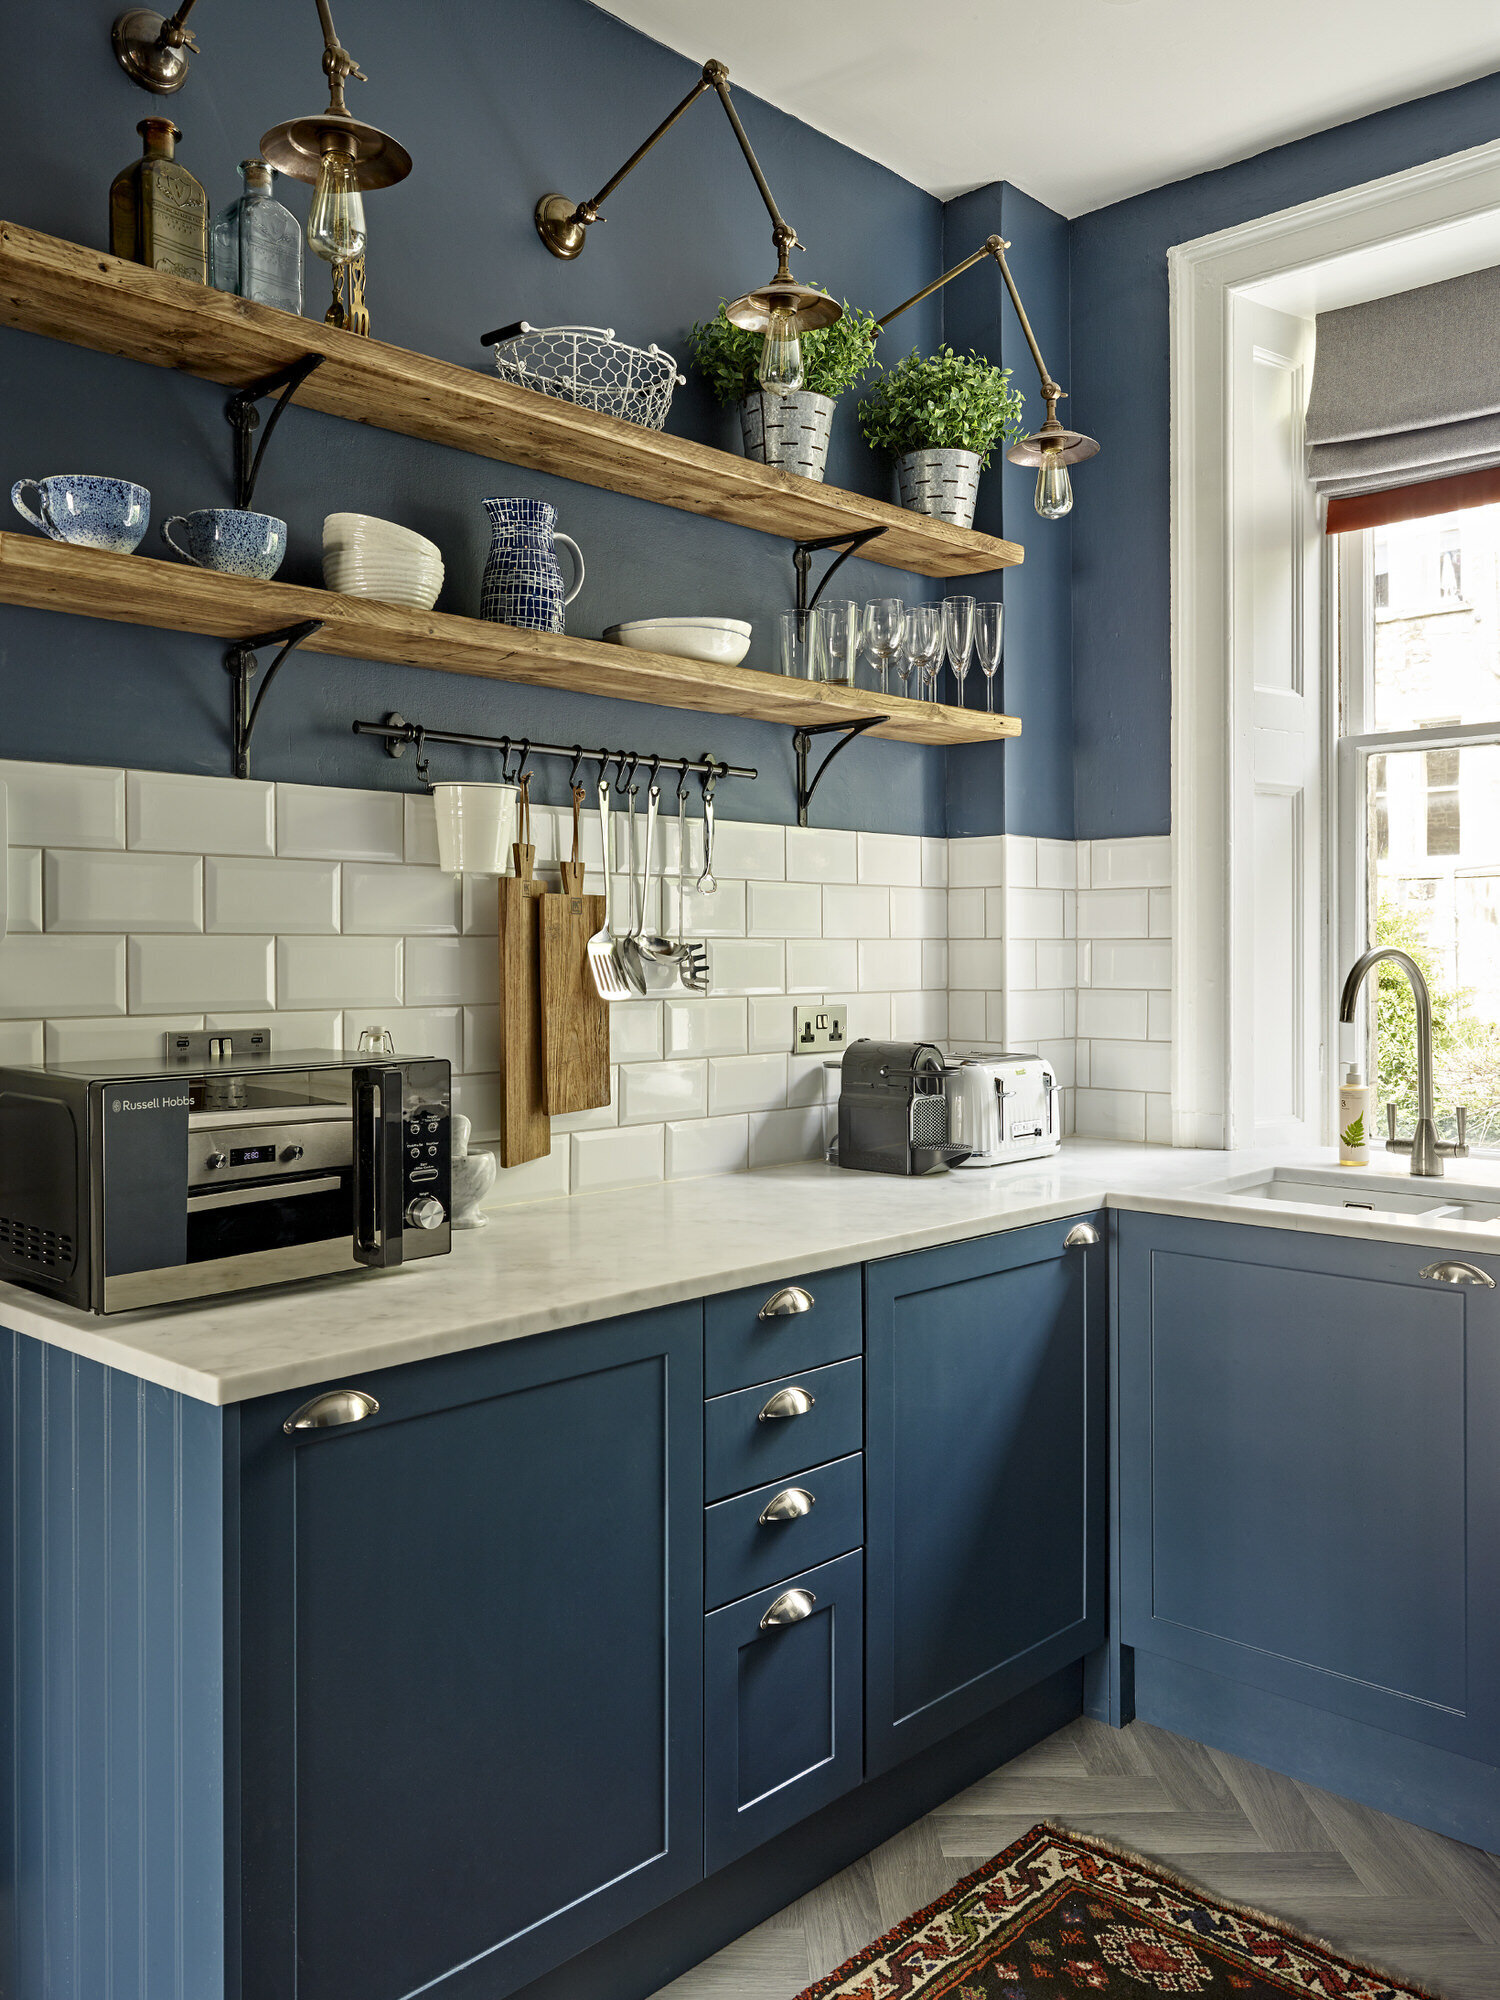 navy kitchen cabinets with wooden open shelving